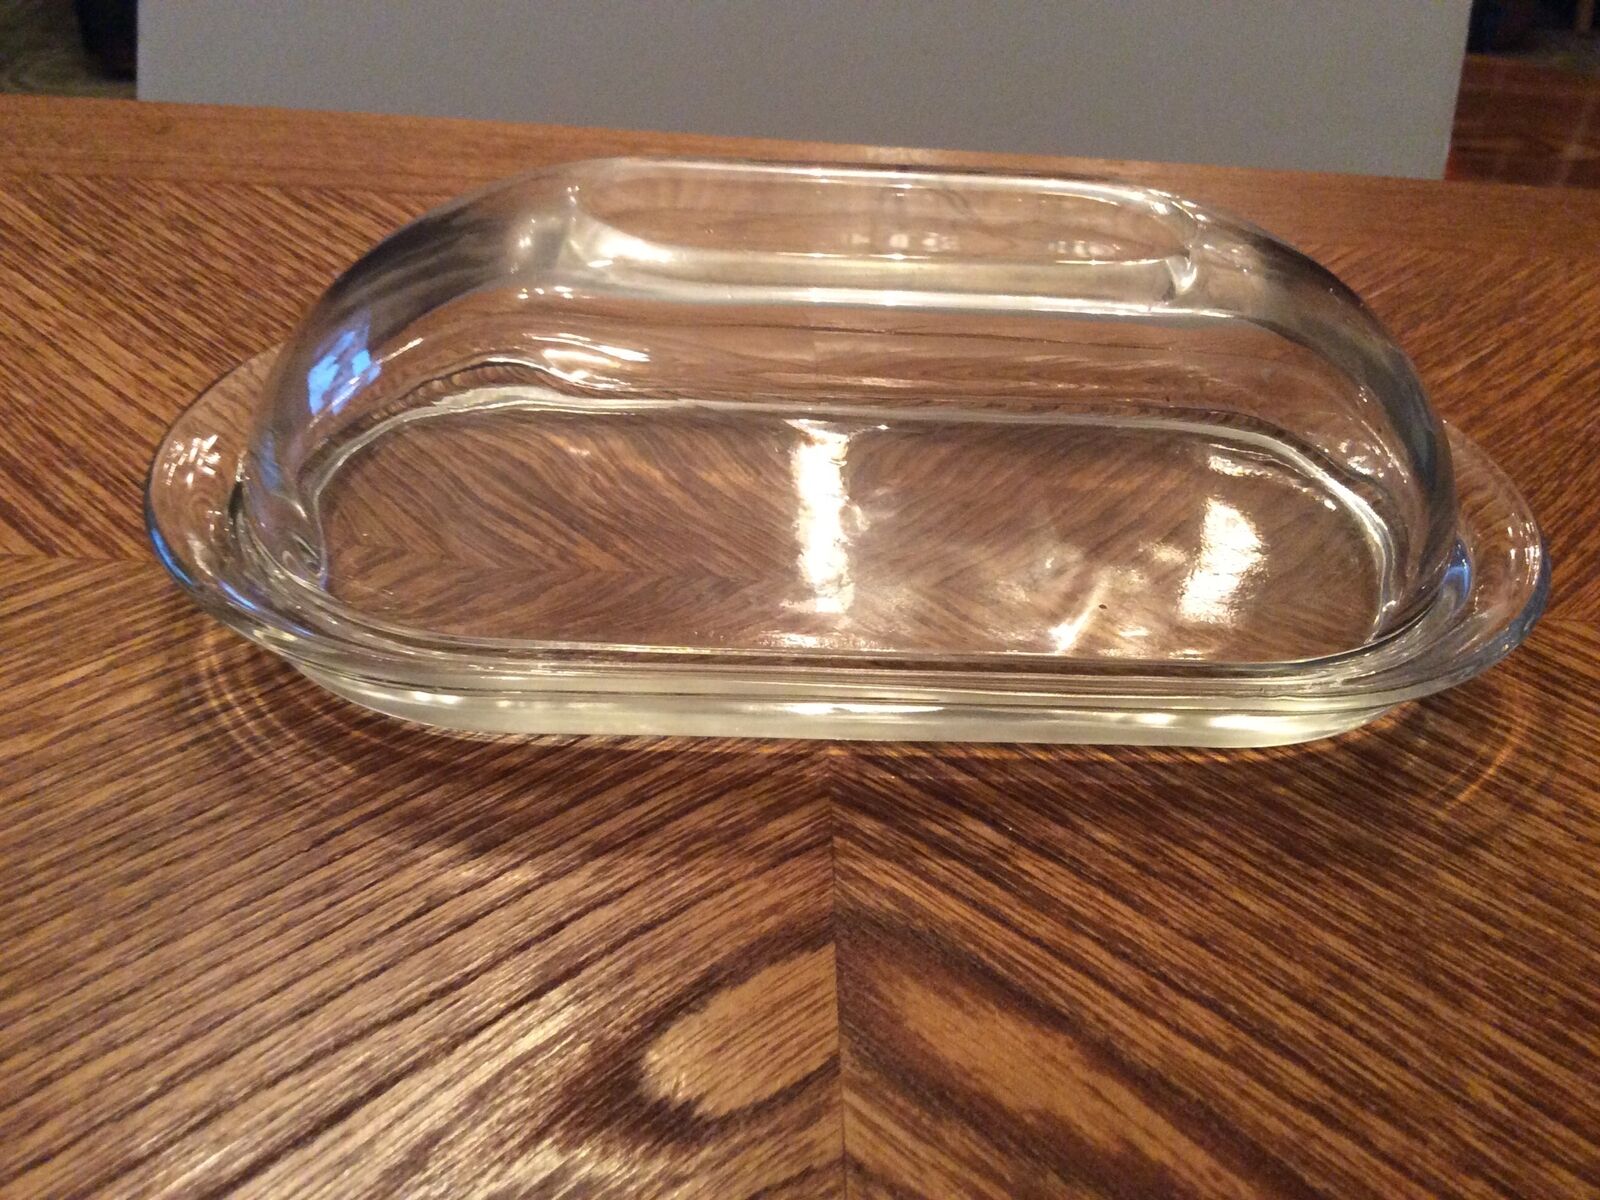 Covered Anchor Hocking Savannah Clear Glass Butter Dish.